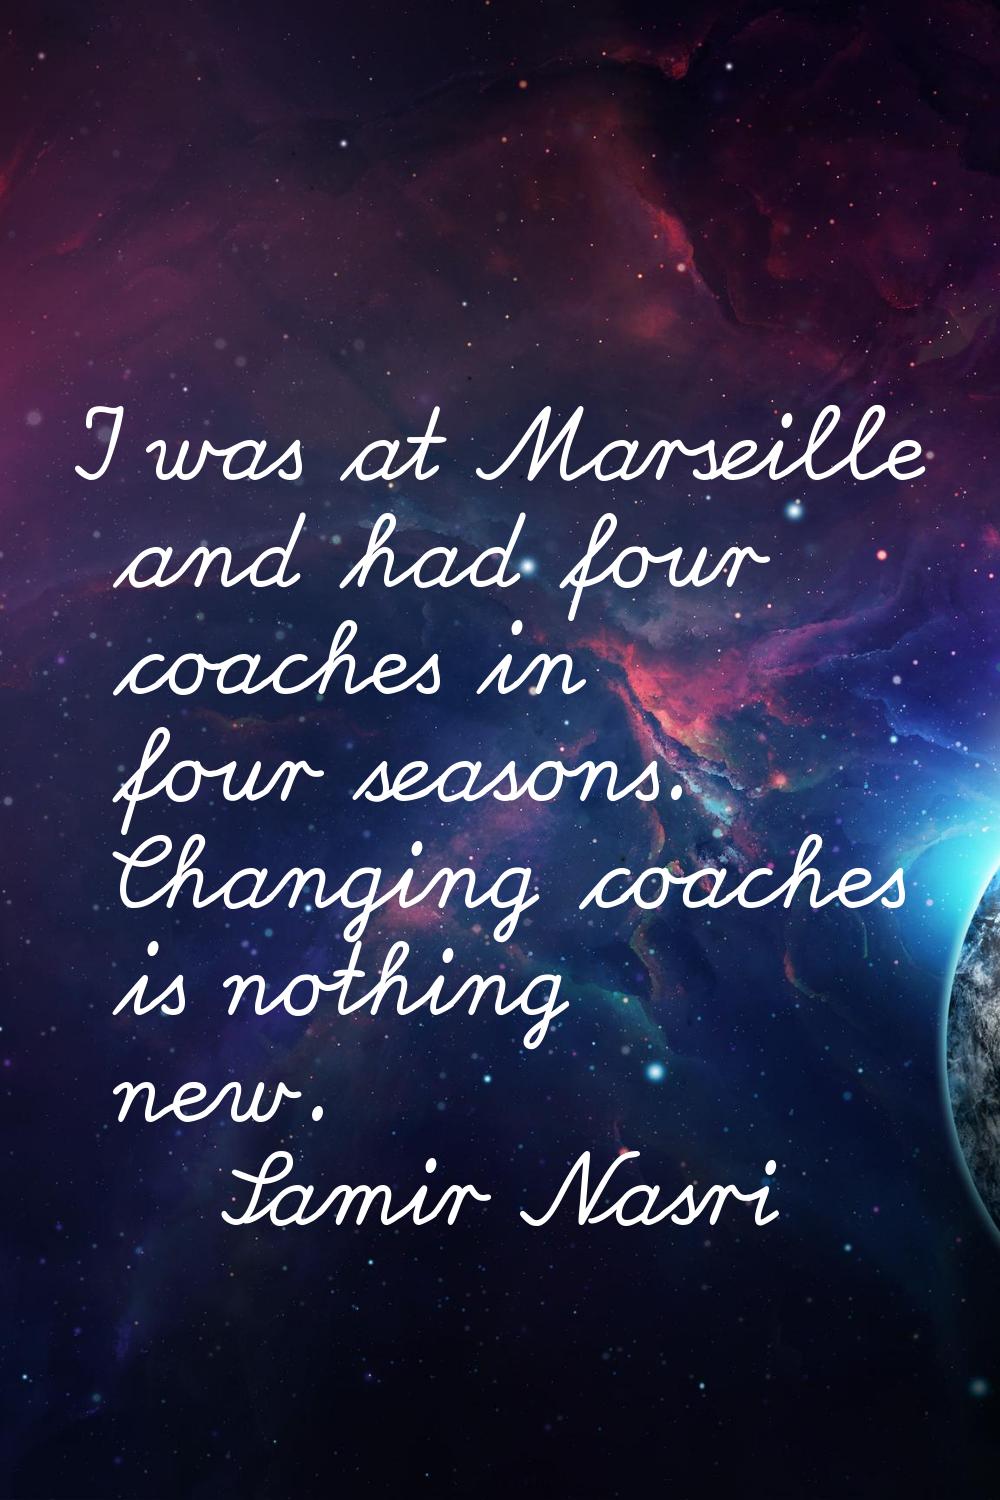 I was at Marseille and had four coaches in four seasons. Changing coaches is nothing new.